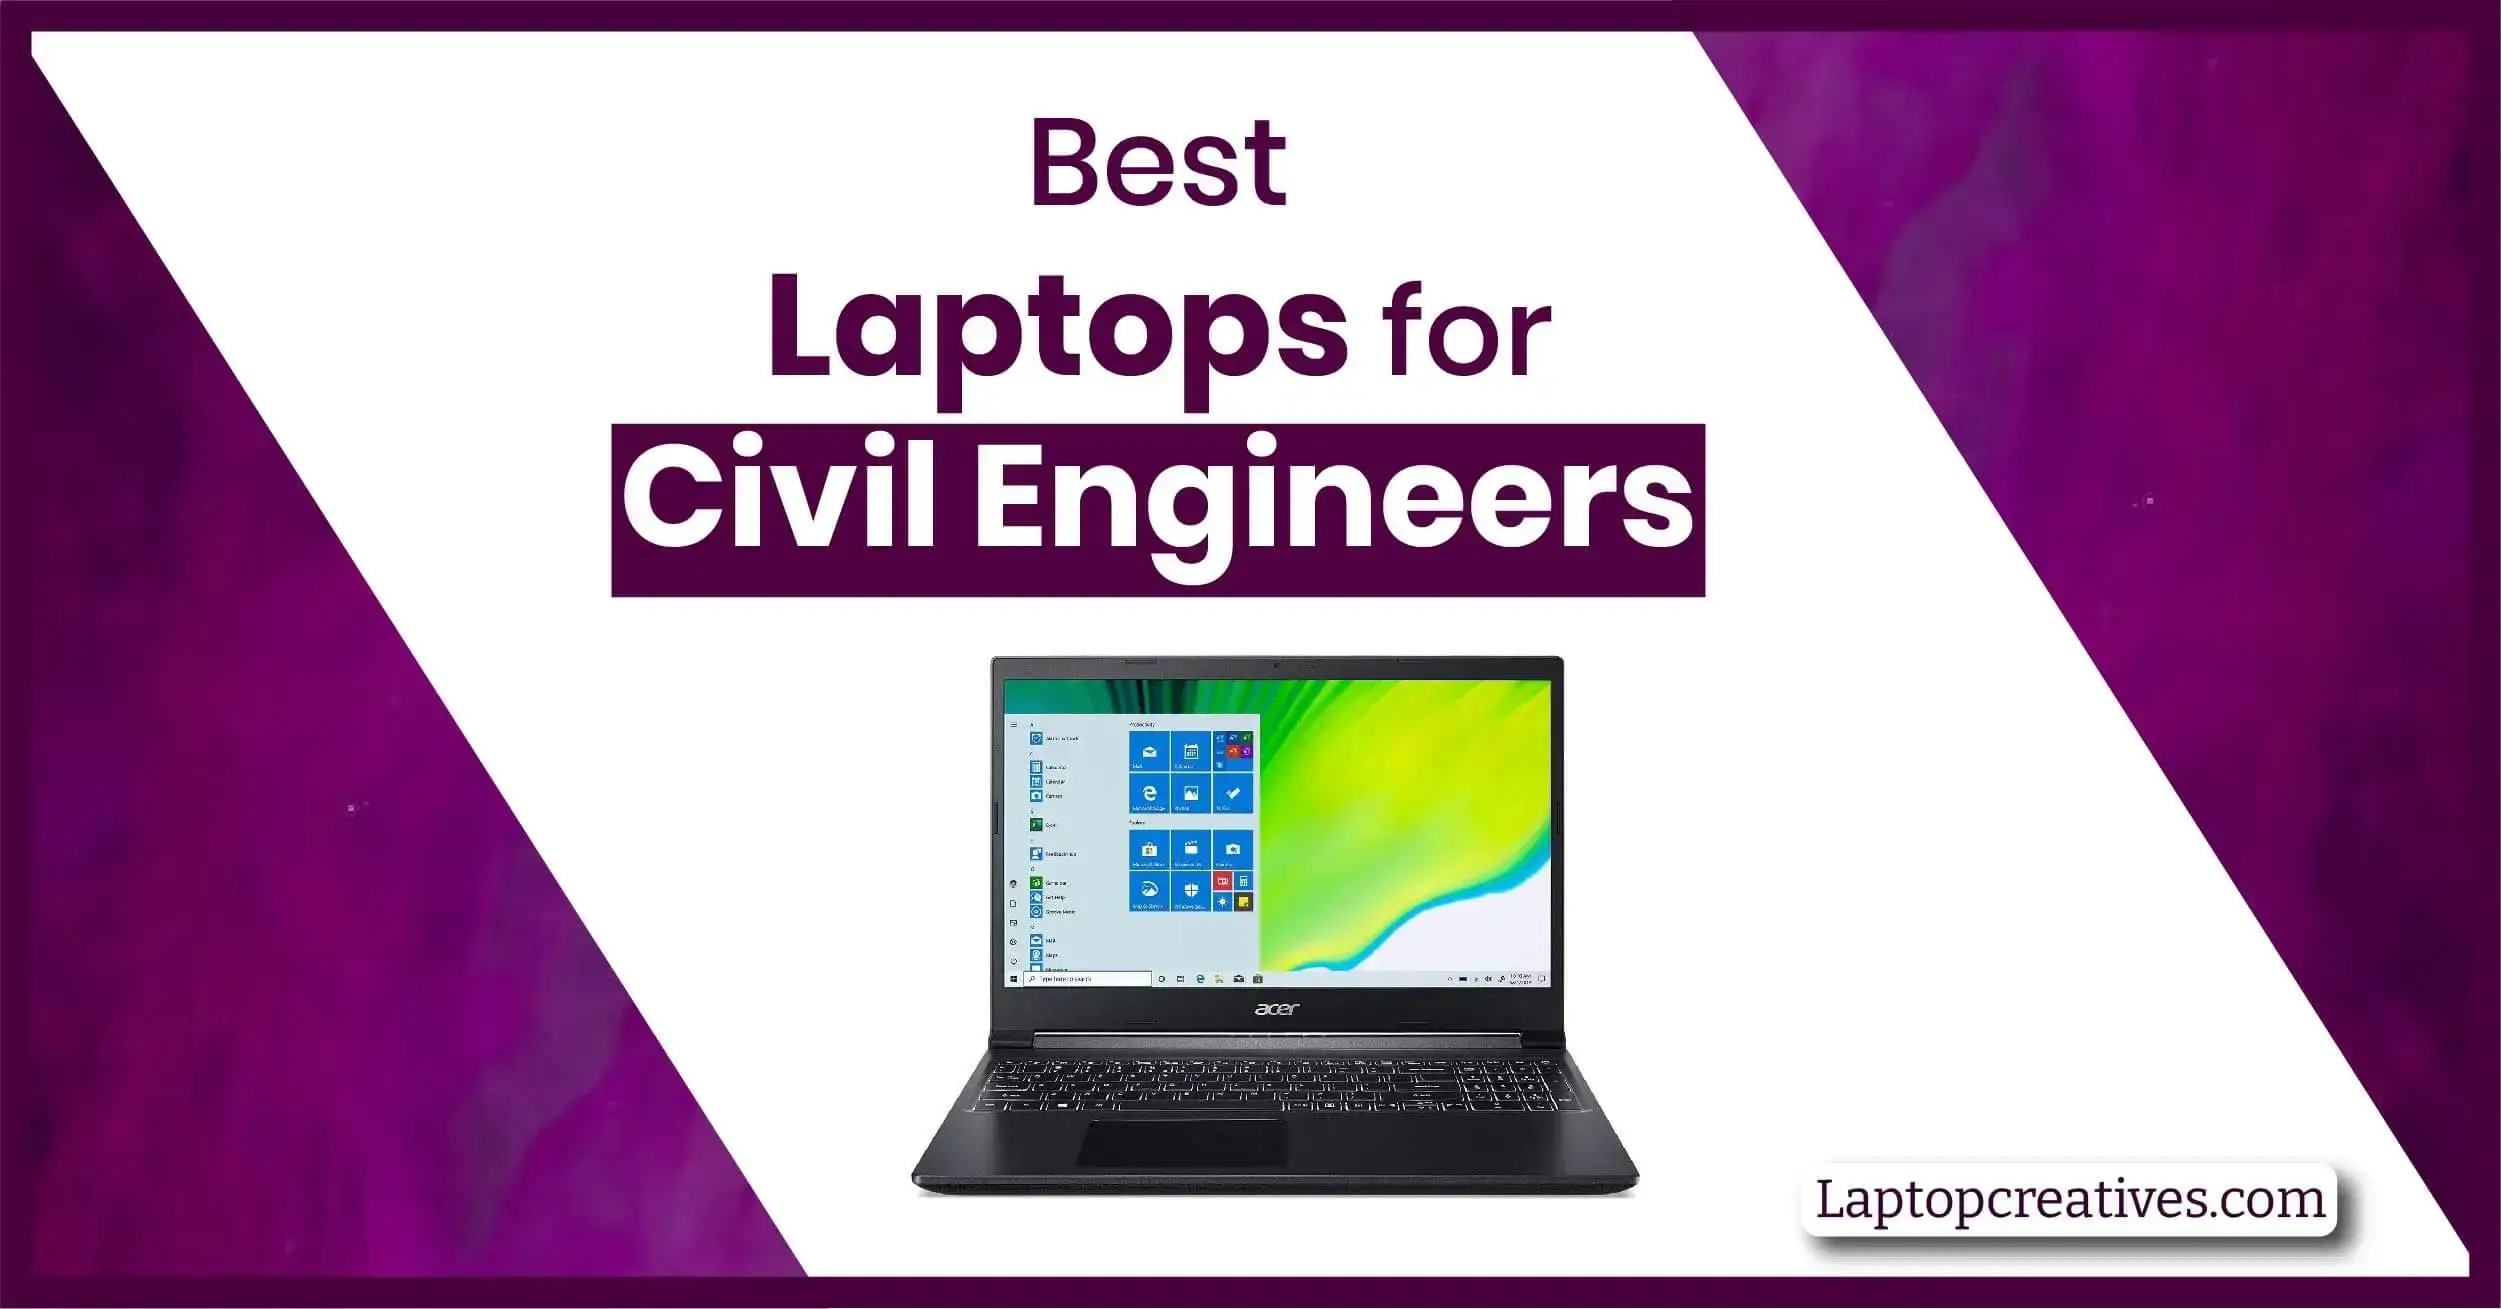 Best Laptops for Civil Engineers